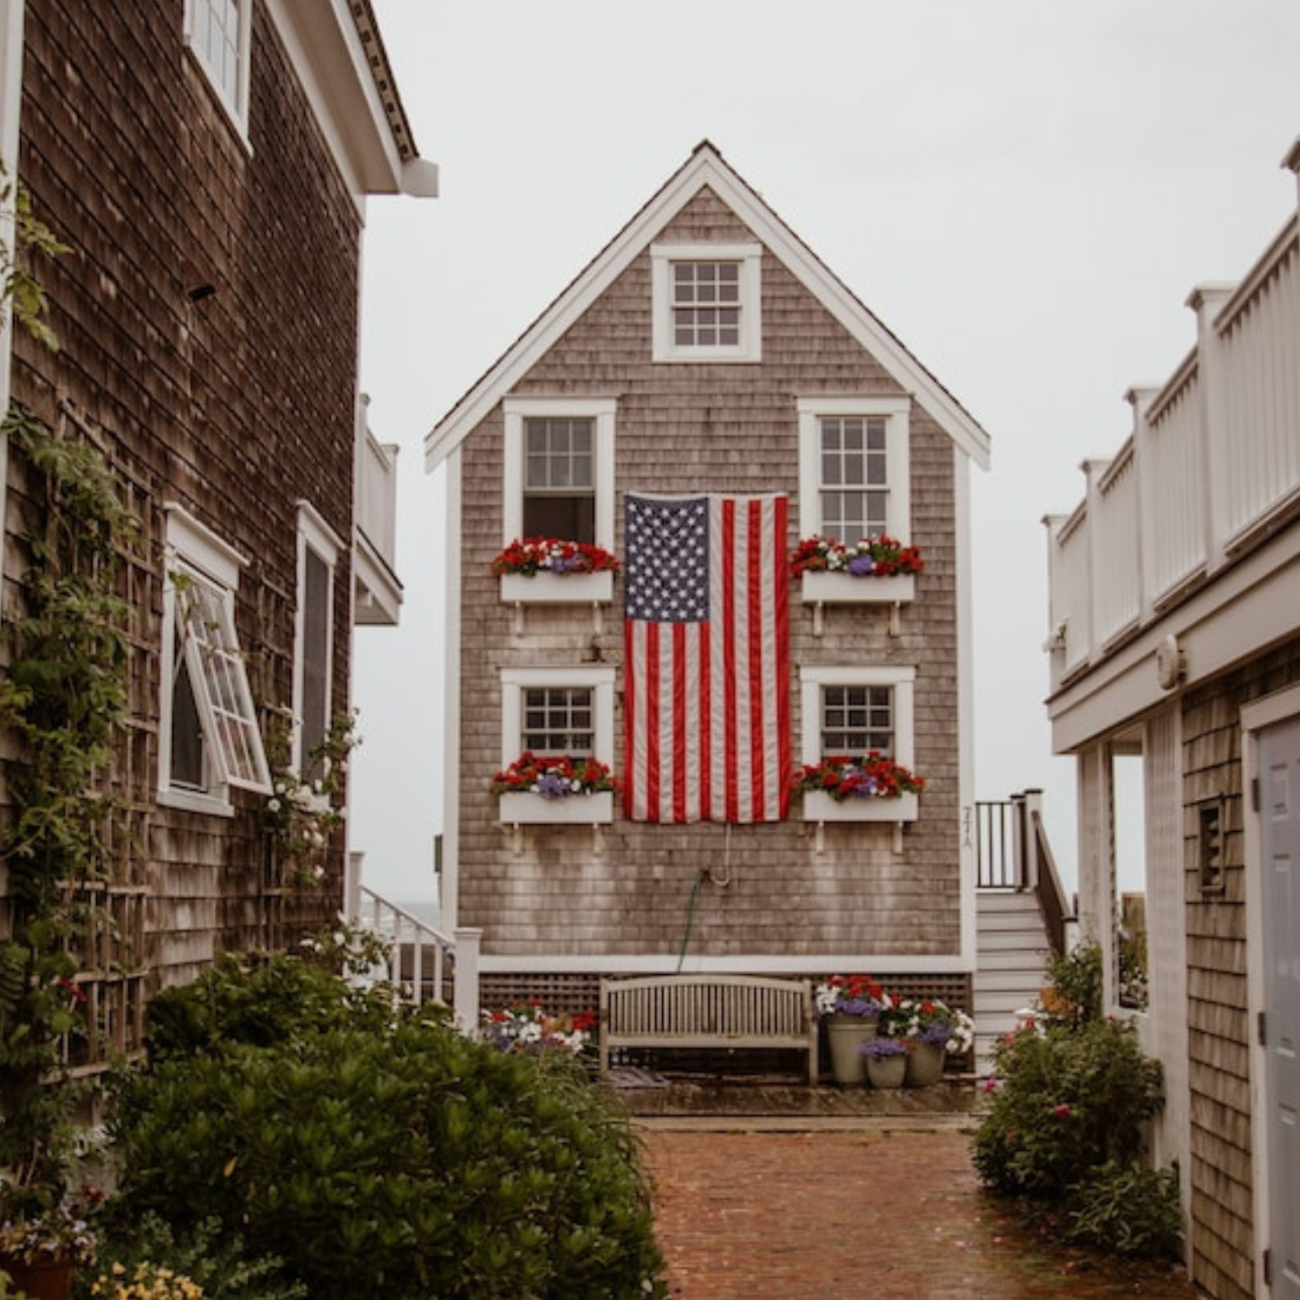 a pretty, brown shingled house, with an American flag hung in the center. red and white flowers in the flower boxes at each window.